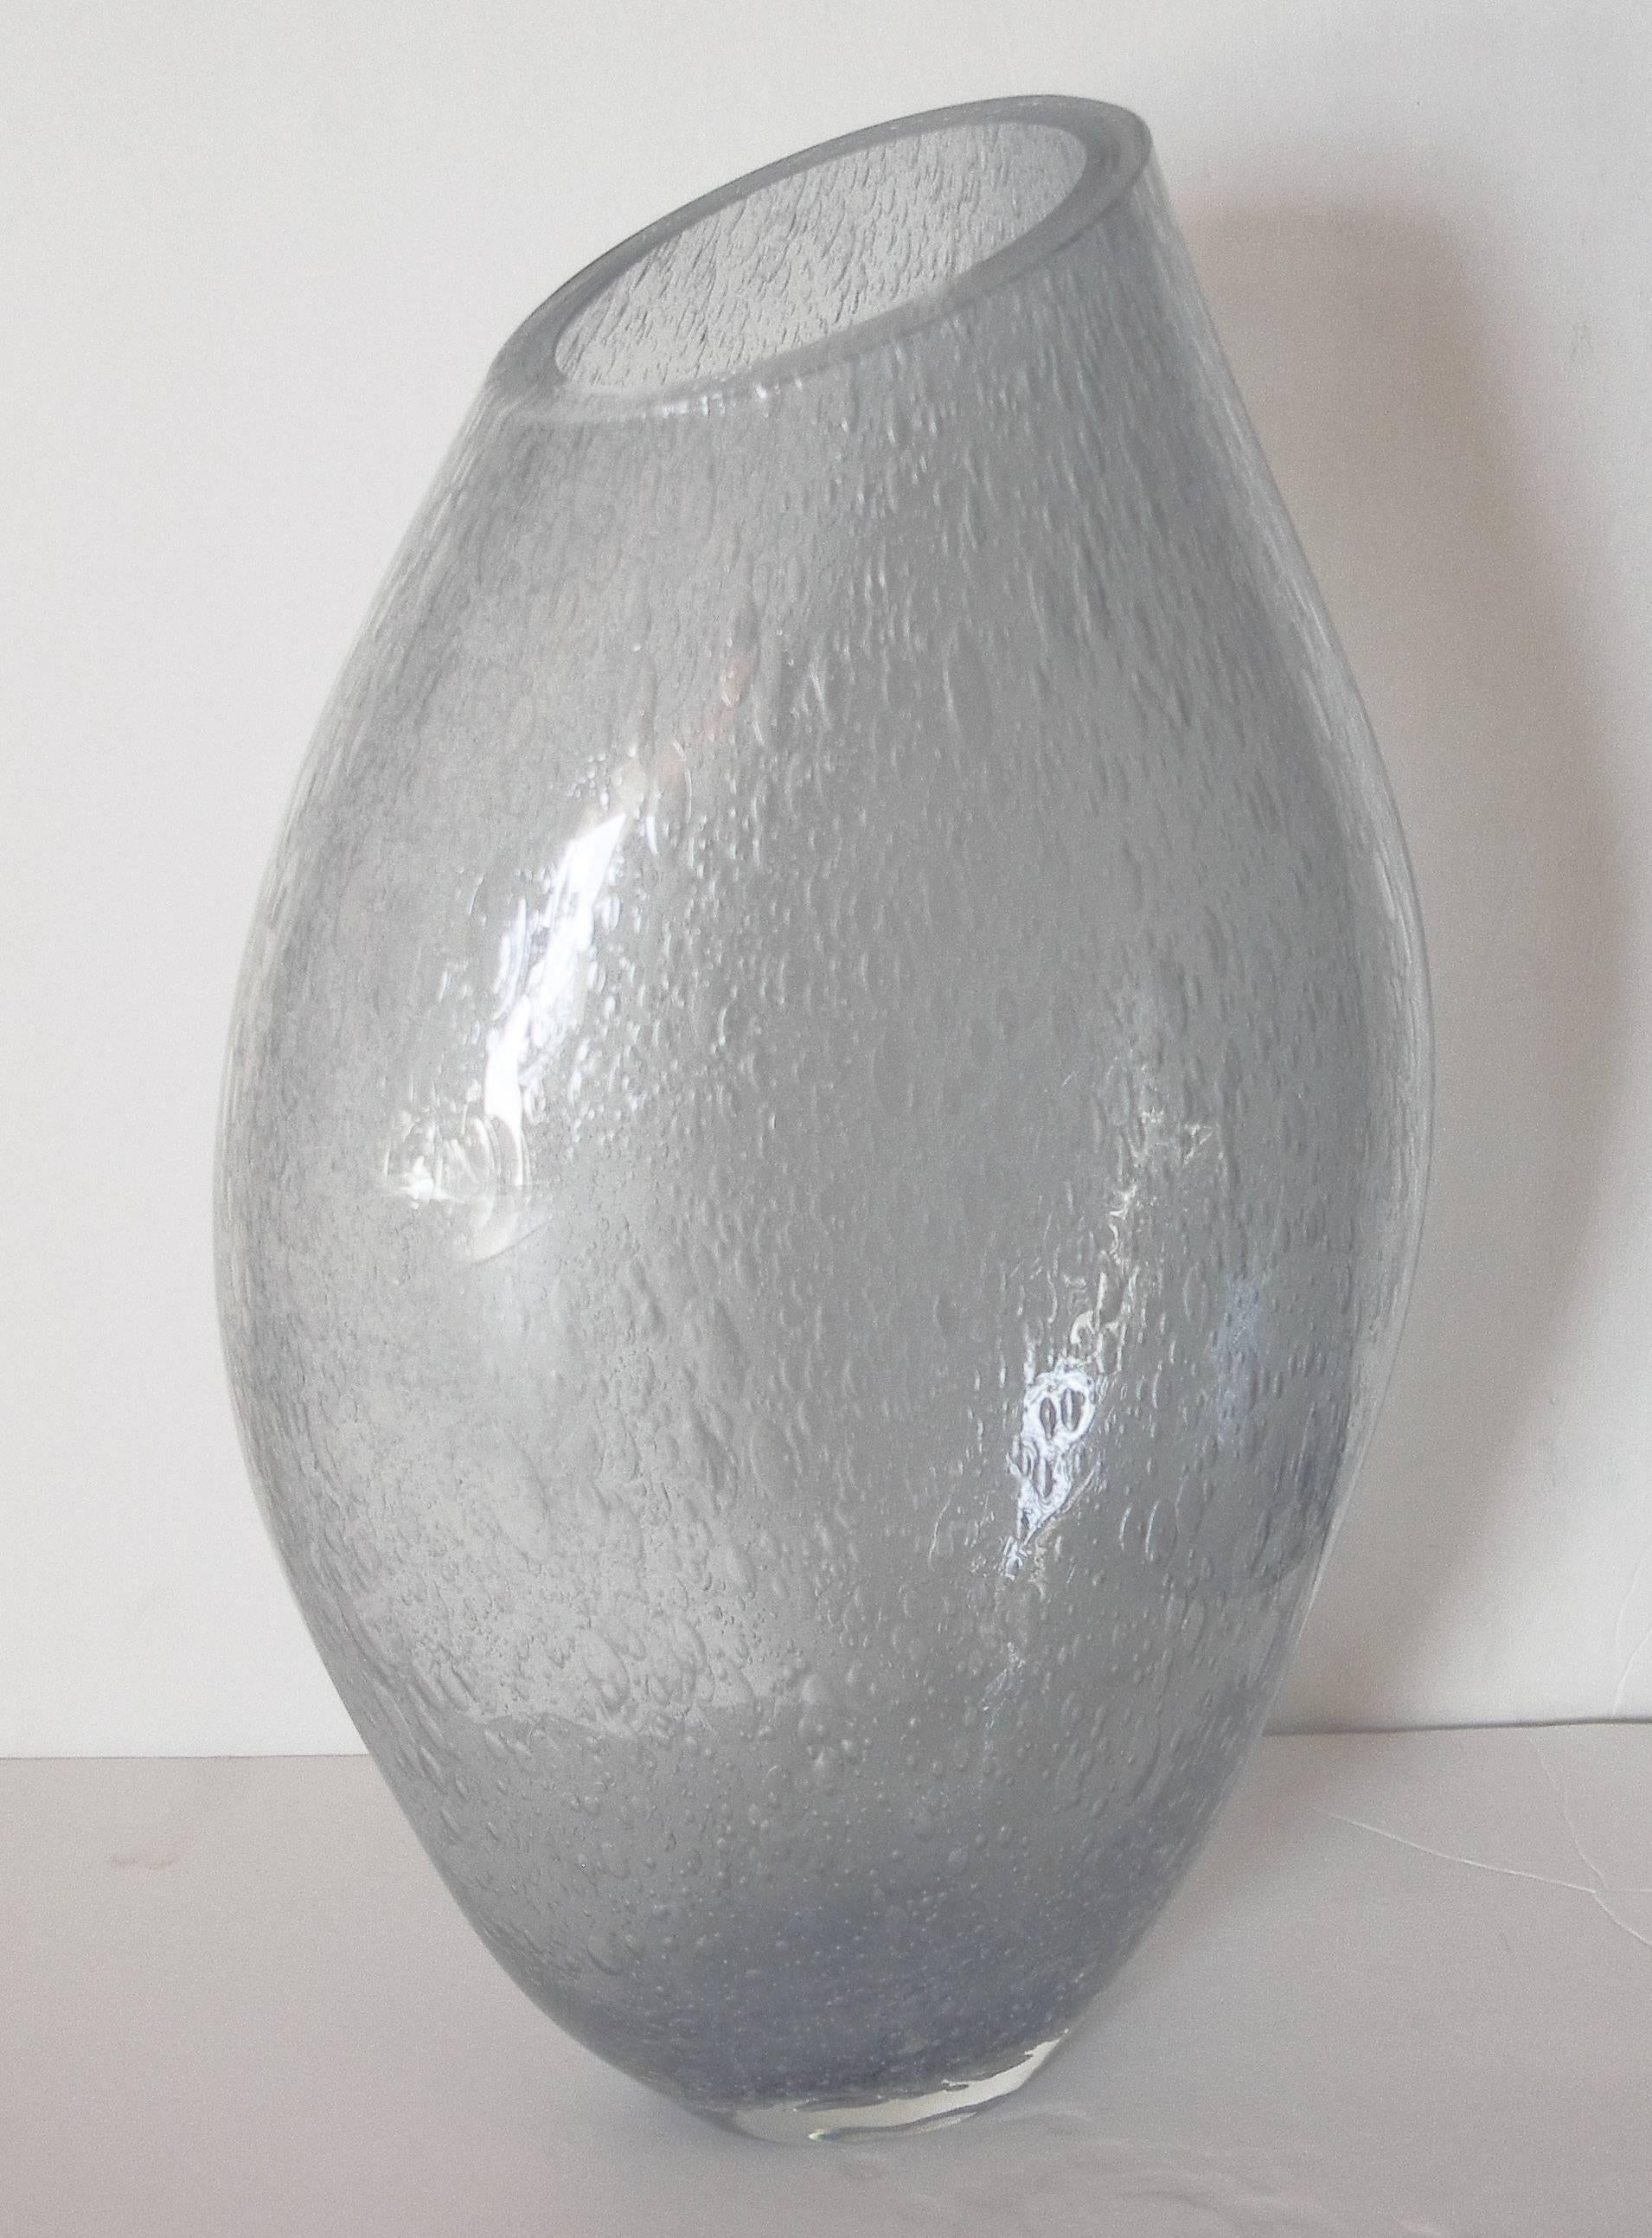 Italian vase or sculpture in thick smoky gray Murano glass blown with bubbles within the glass in Pulegoso technique by Alberto Dona for Fabio Ltd
Signature engraved on the base / Made in Italy
Height: 19 inches / Width: 11.5 inches / Depth: 8.5